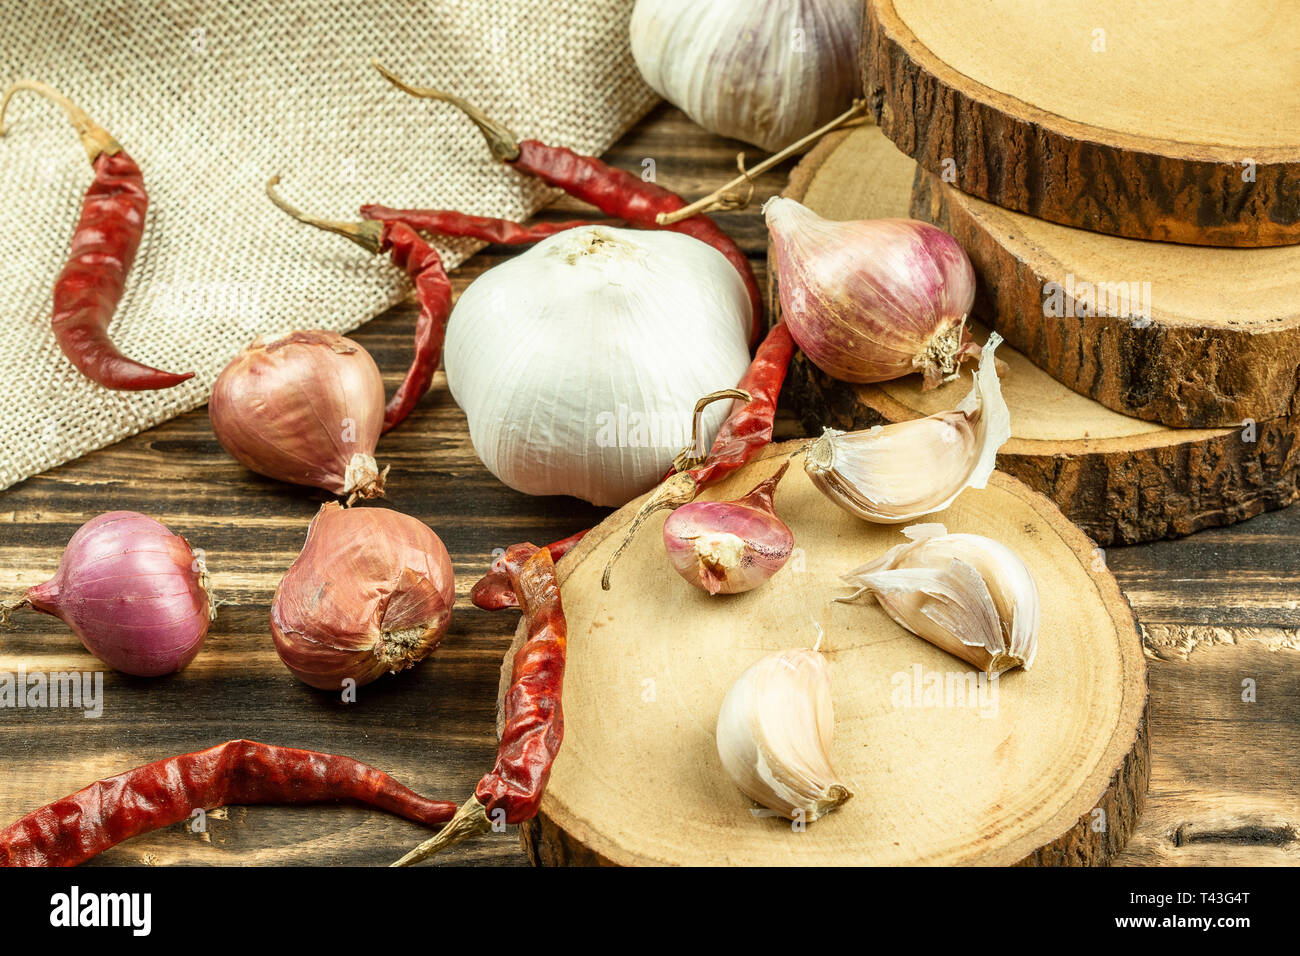 Close up of shallot, garlic, dried red chilli on wooden table background. Stock Photo